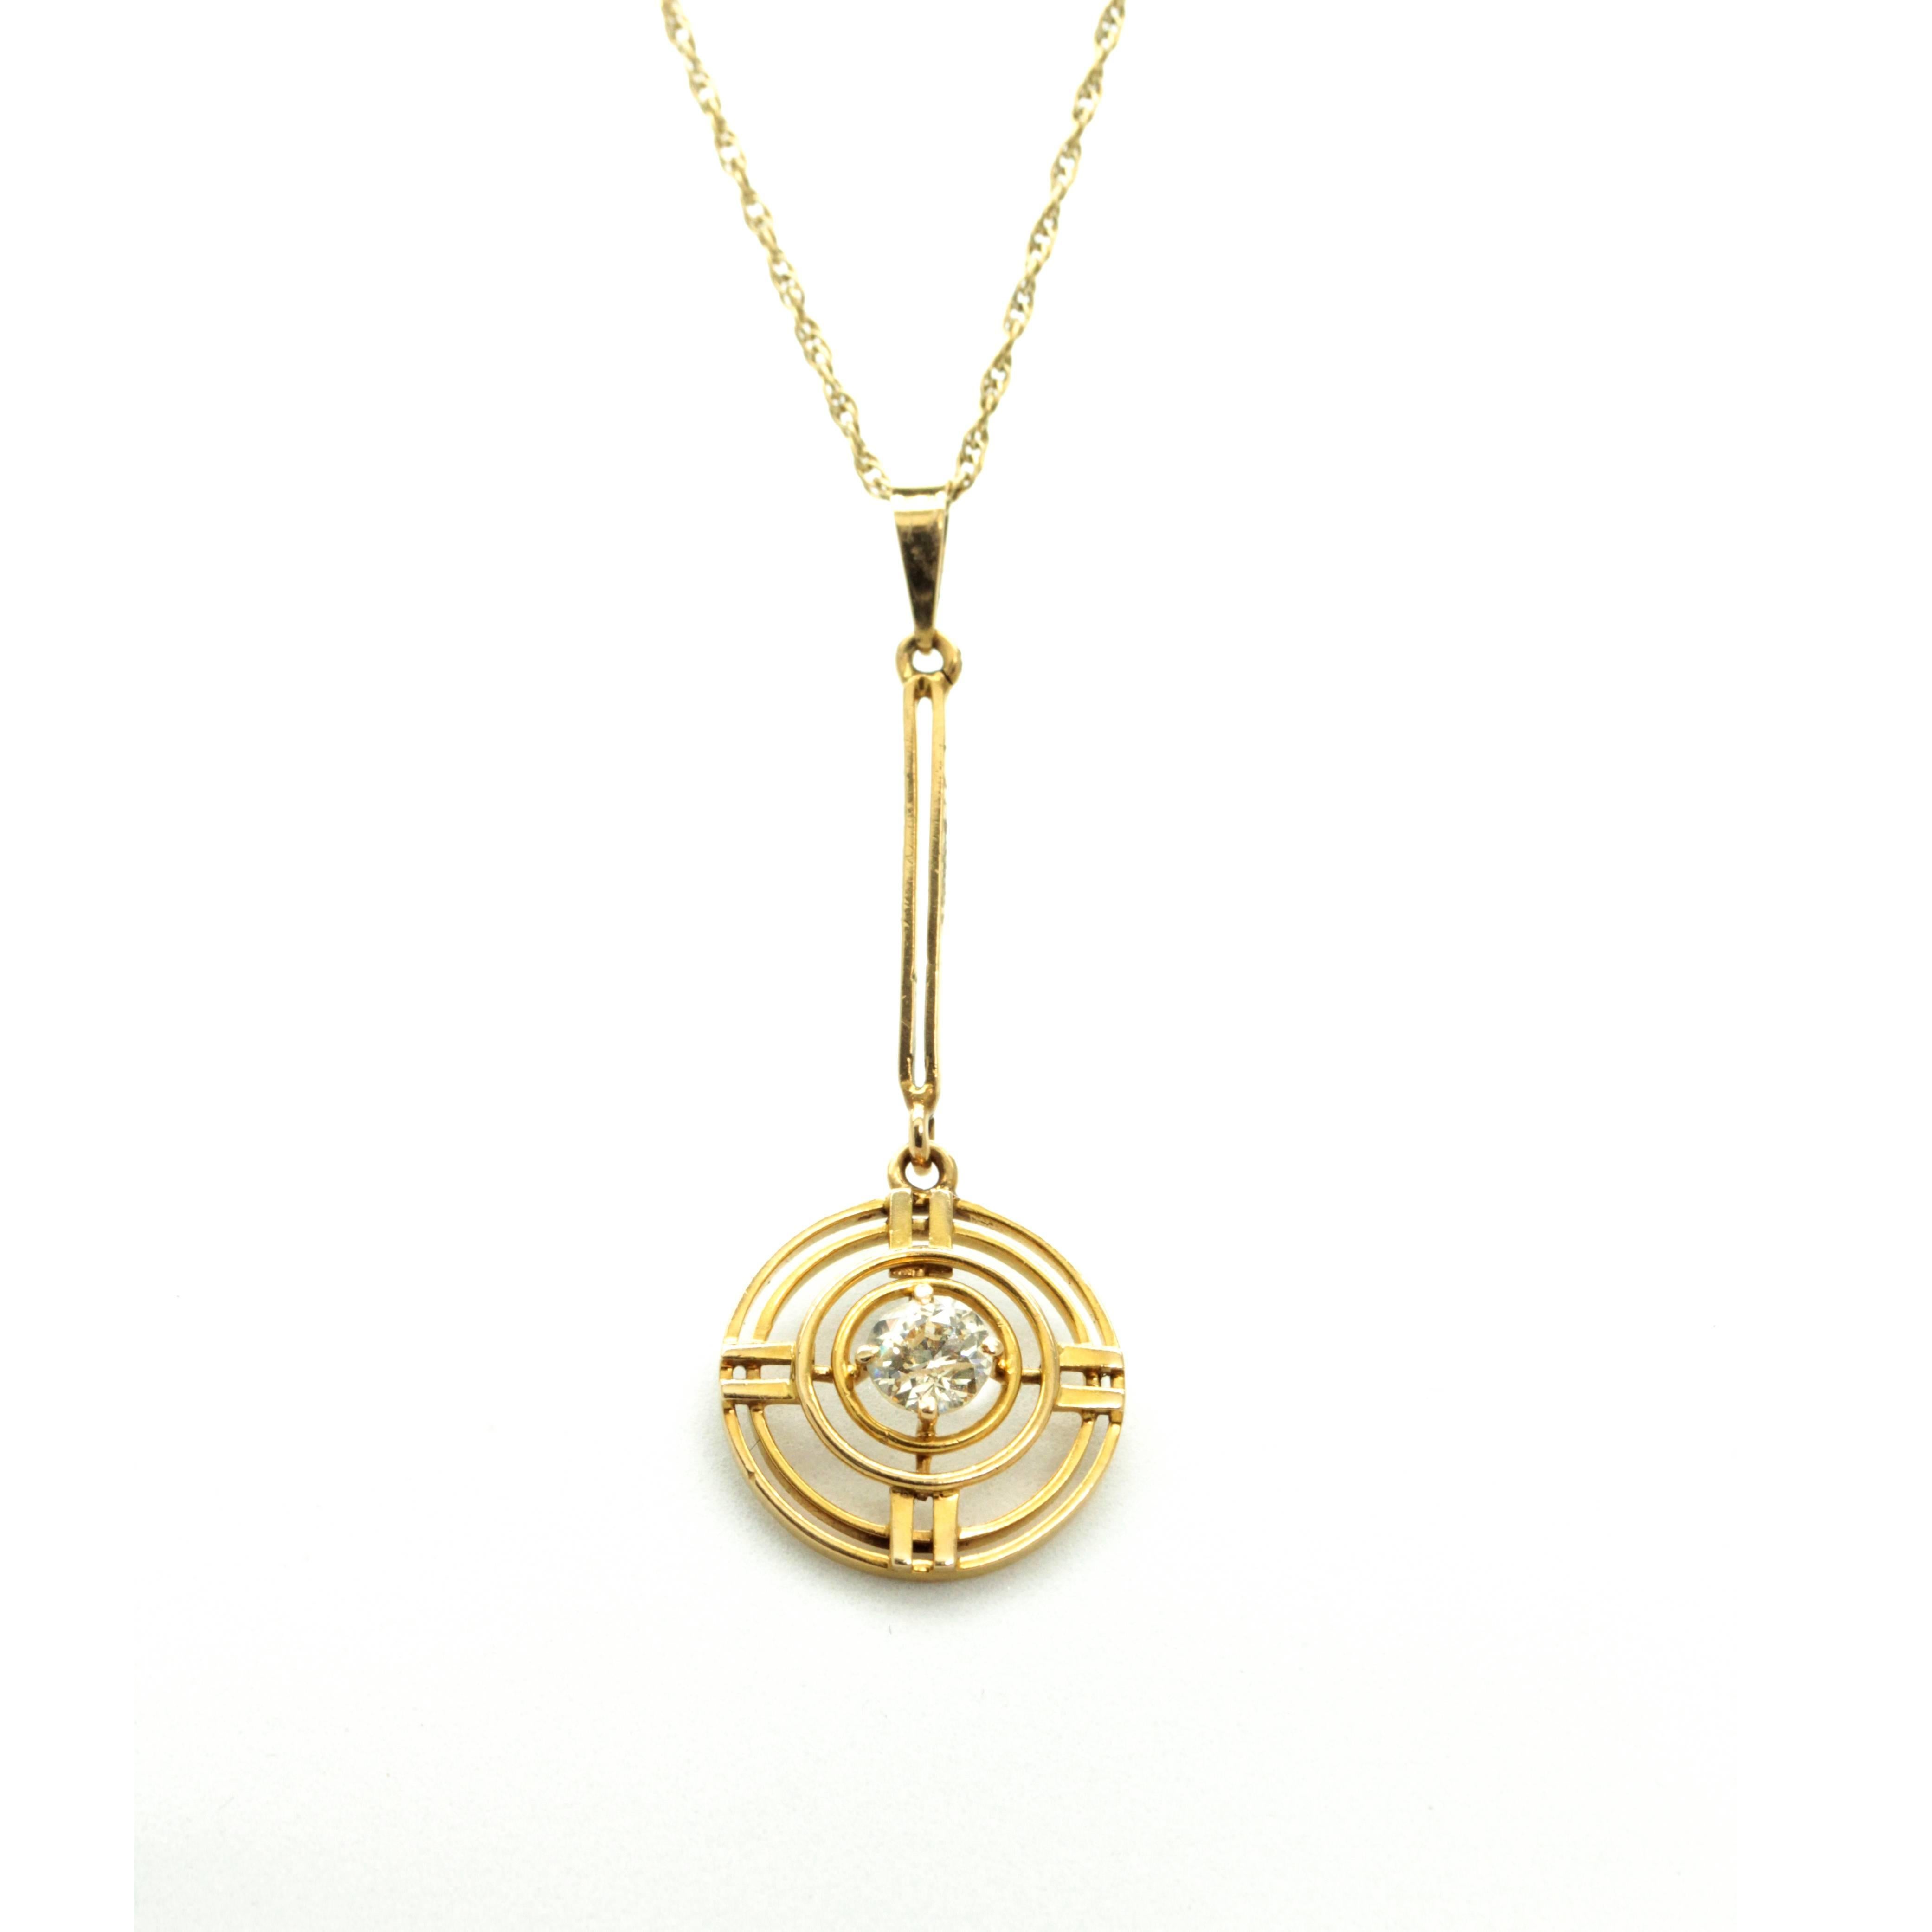 Antique Art Deco Old European Cut Champagne Diamond handmade pendant on new gold chain, really beautiful necklace

This really beautiful necklace features a 0.40 ct Old European Cut Diamond 4 claw set in the center of a wire circular and bar style